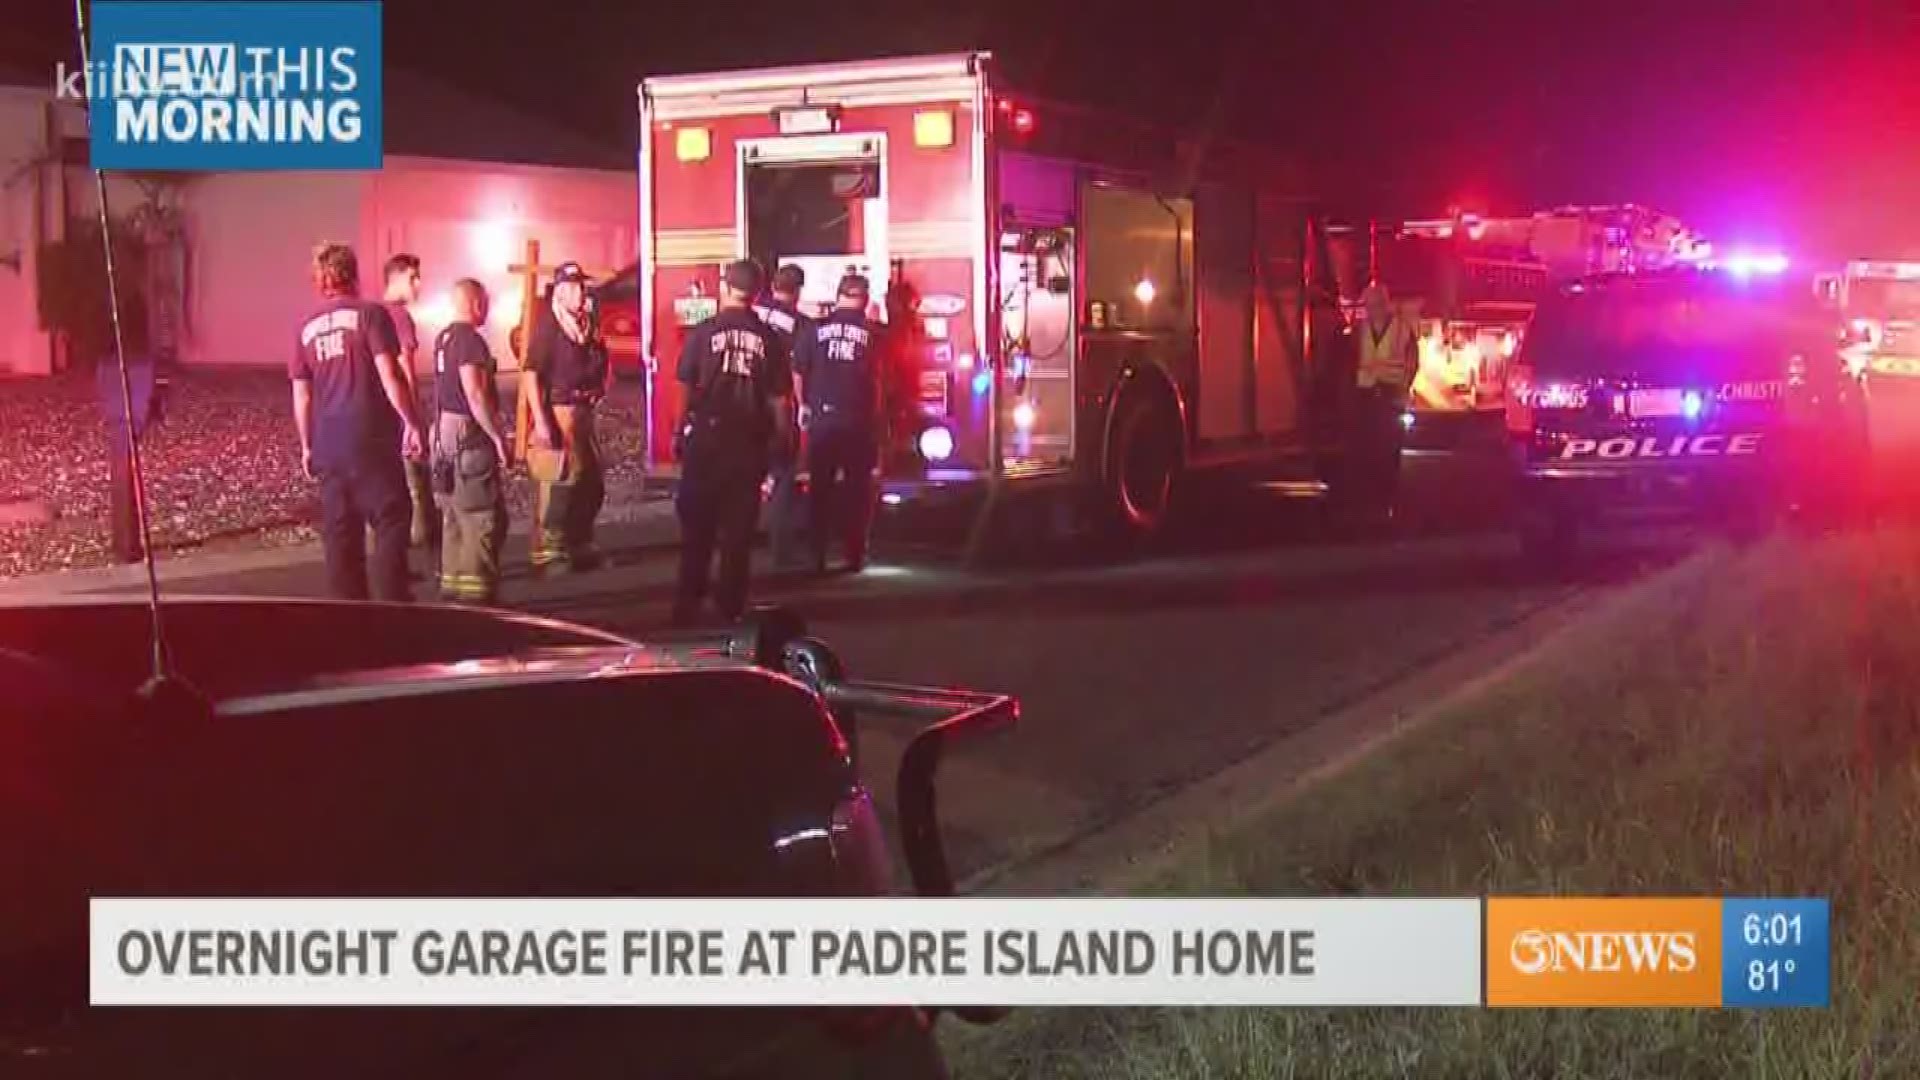 Fire Investigators on Padre Island are working to determine what sparked a garage fire at a home overnight.